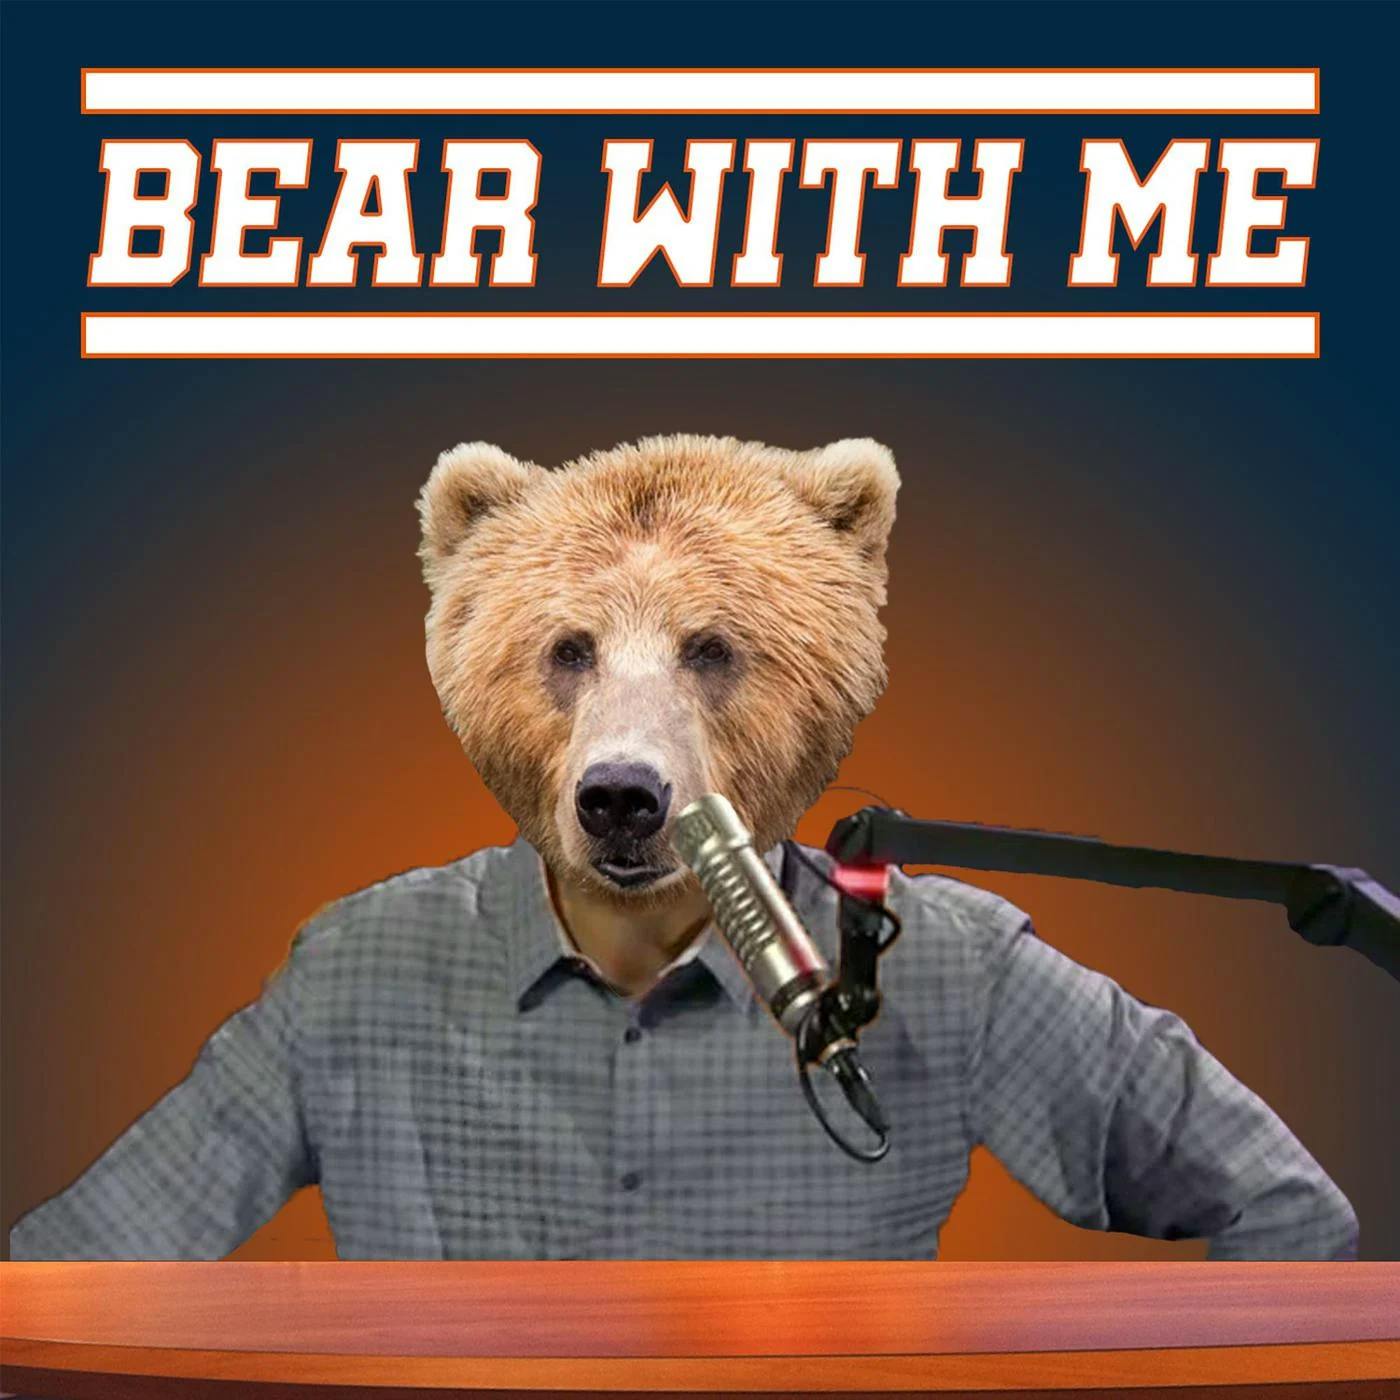 Bear With Me: Recapping the Bears' Draft Day 2 (with Quinten Krzysco!)